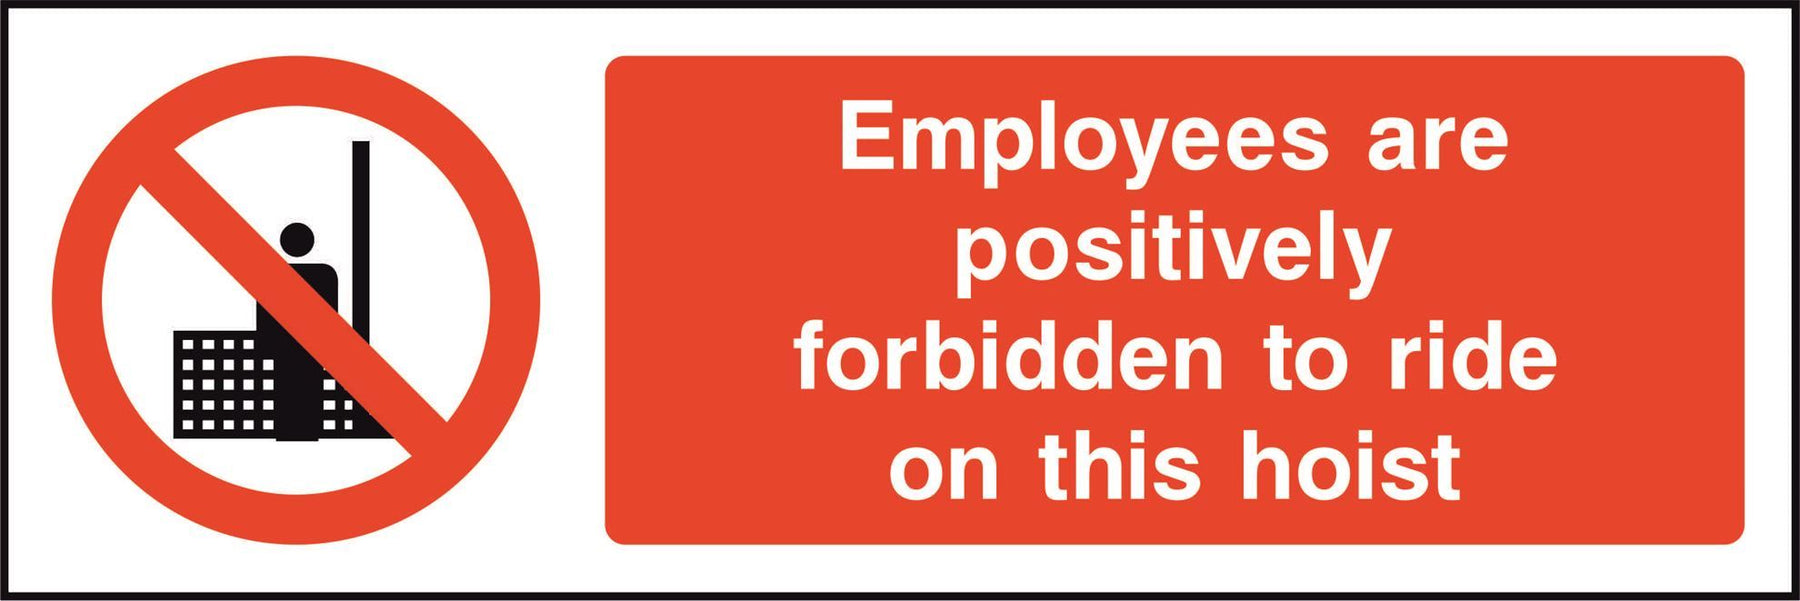 Employees are positively forbidden to ride on this hoist